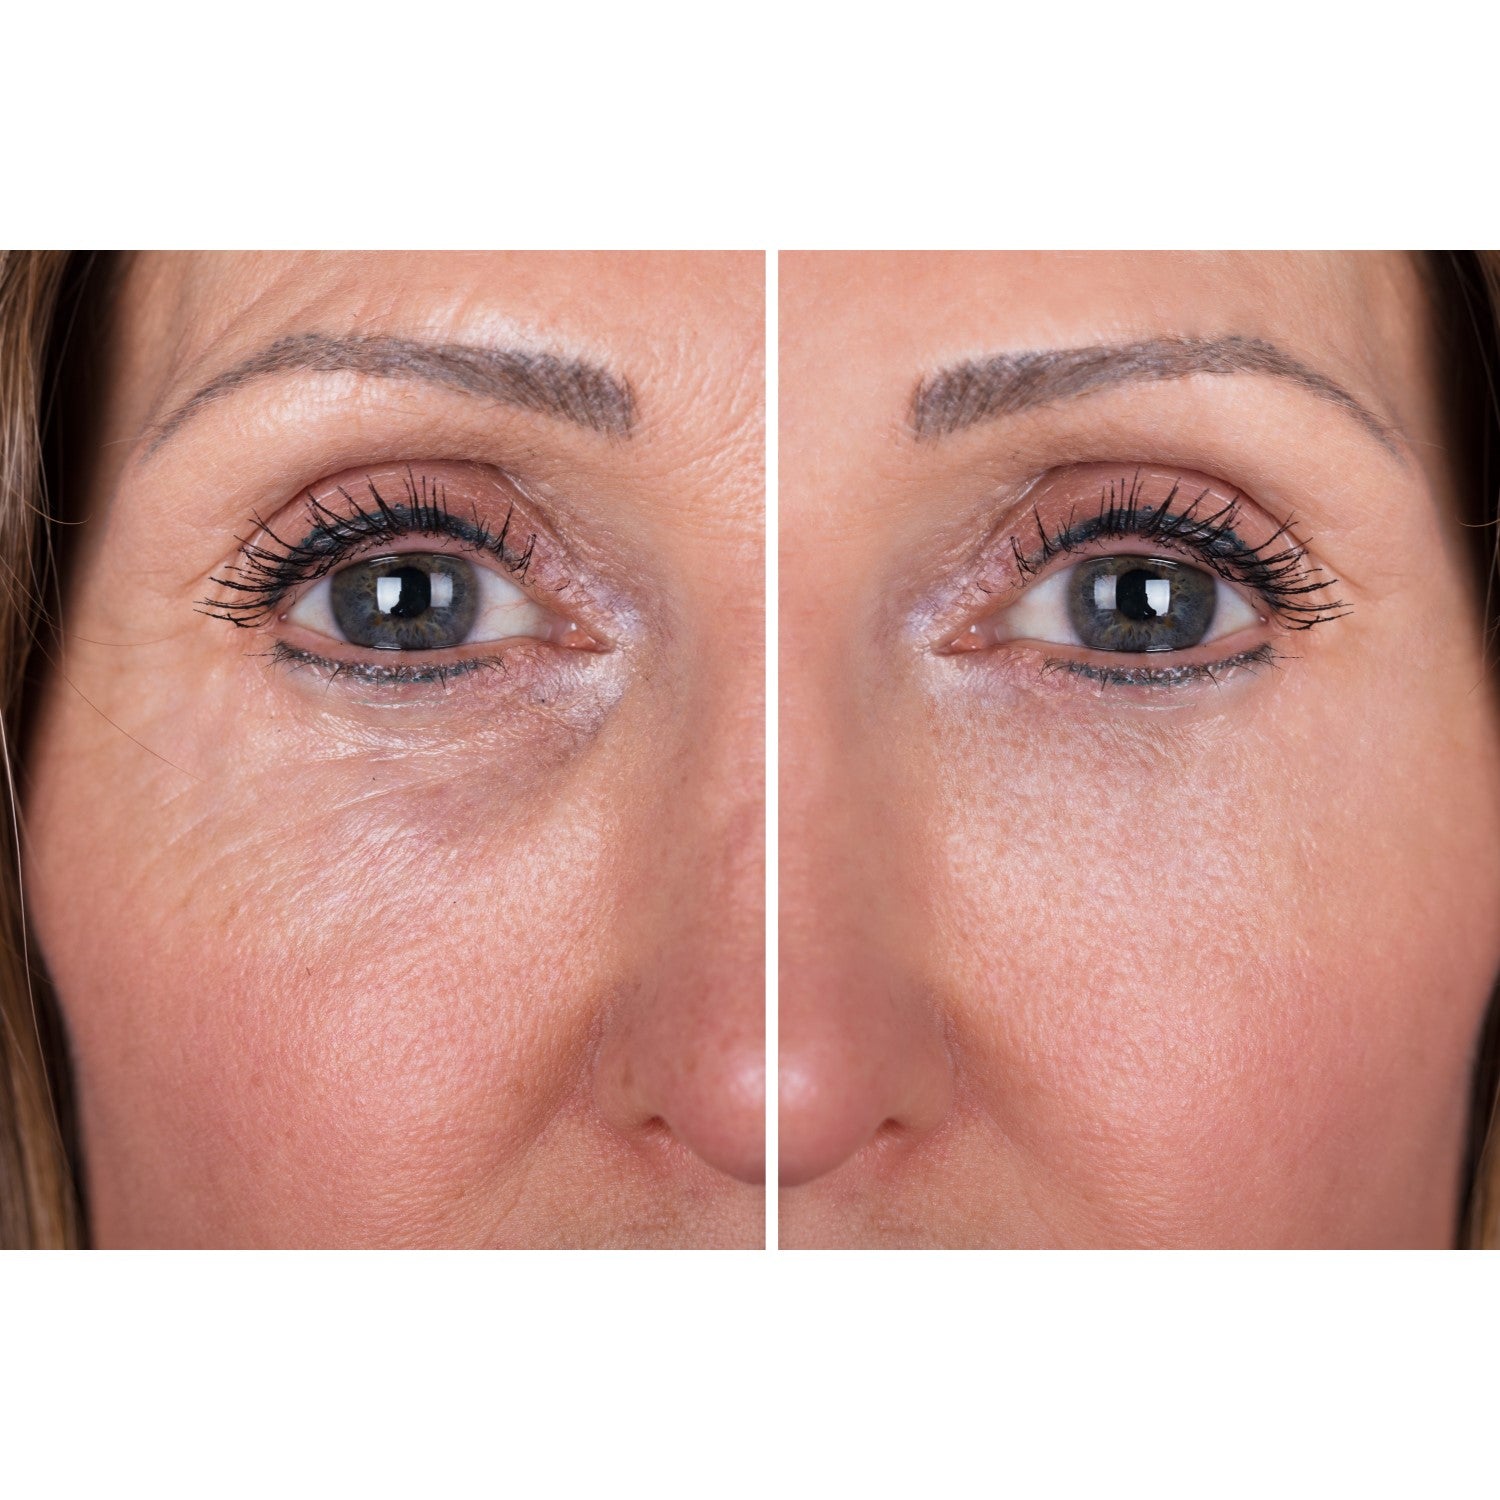 Before and after of lines and wrinkles using Immaculift instant eye lift serum. Immaculift reduces wrinkles, pore size and eye bags, and tightens sagging skin.